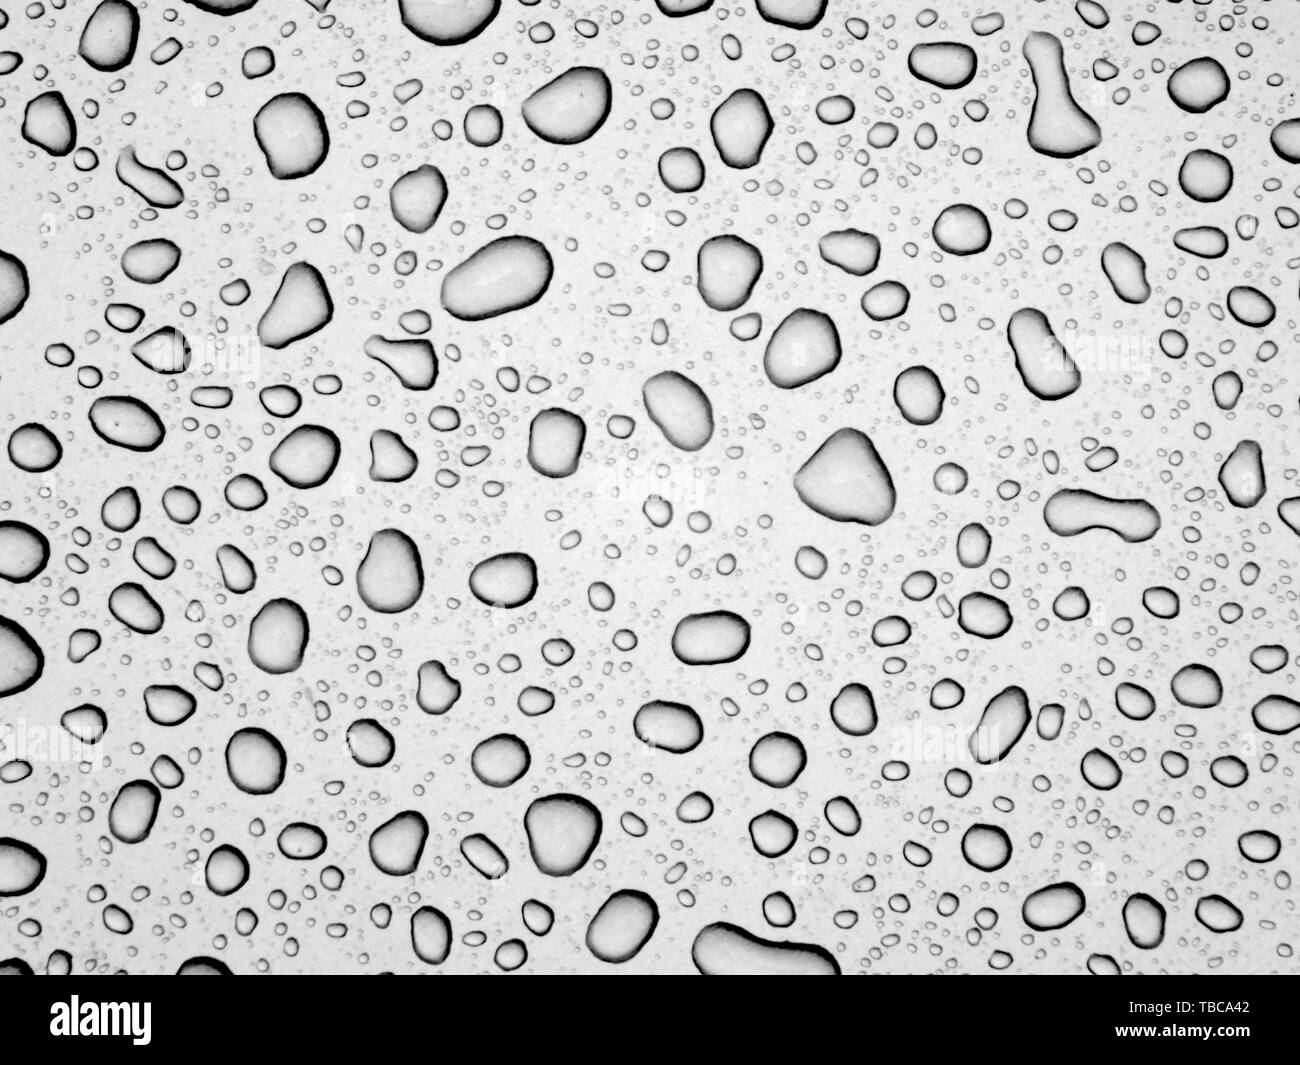 rain, ripple, wet, water, purity, pearl, droplet, liquid, wave, cleaner, motion, round, bubble, splash, droplet, effect, dew, green pine, smooth, water material, splash, droplet, micro shot, splash, water pattern Stock Photo